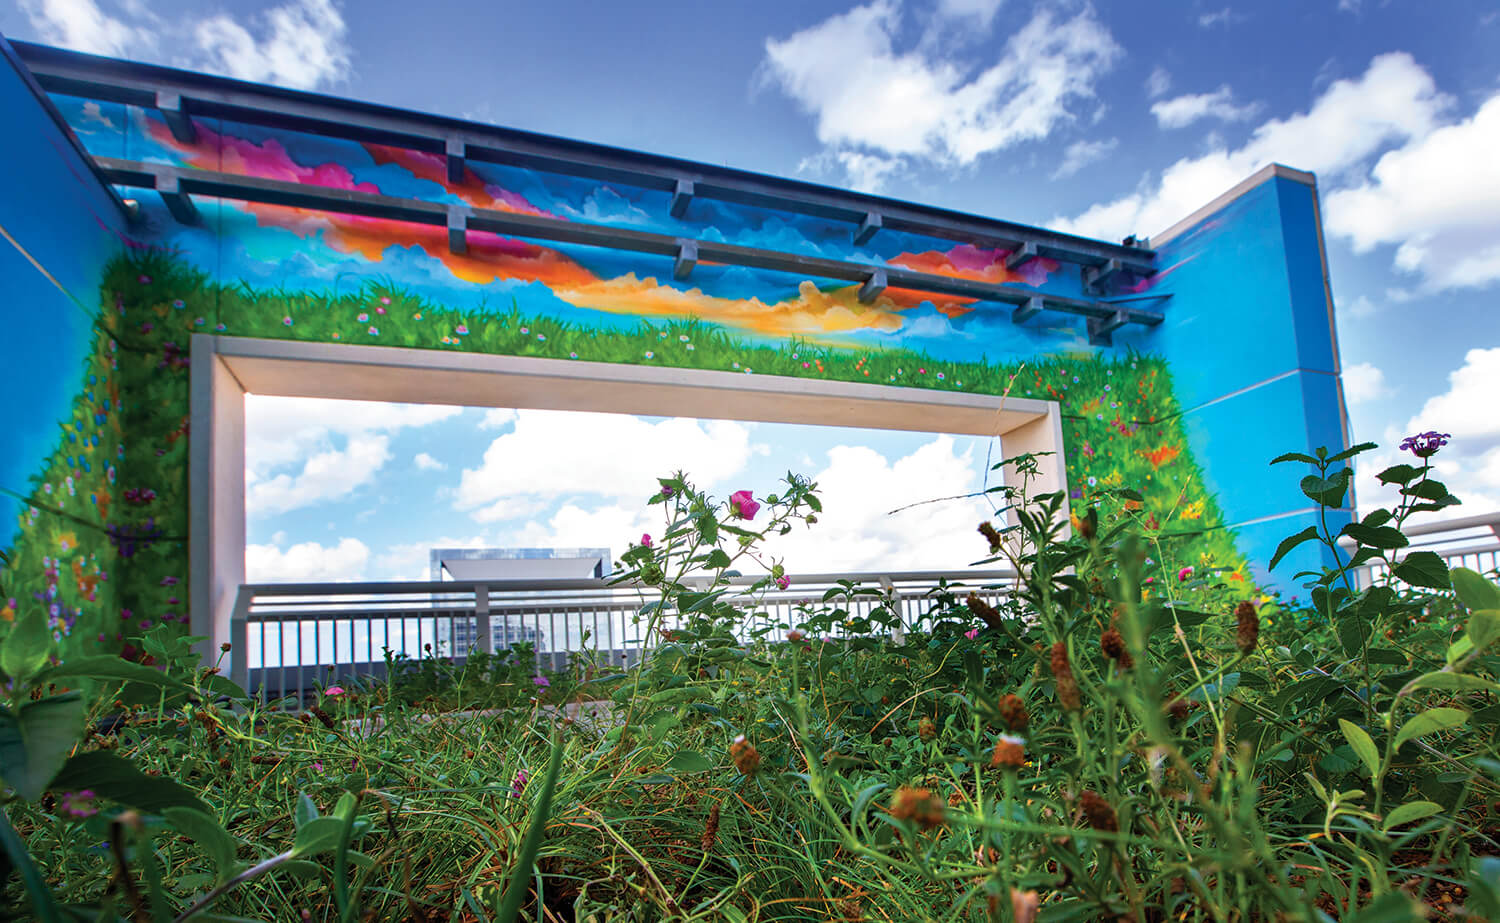 Gonzo247 painted a mural to accompany the rooftop garden.